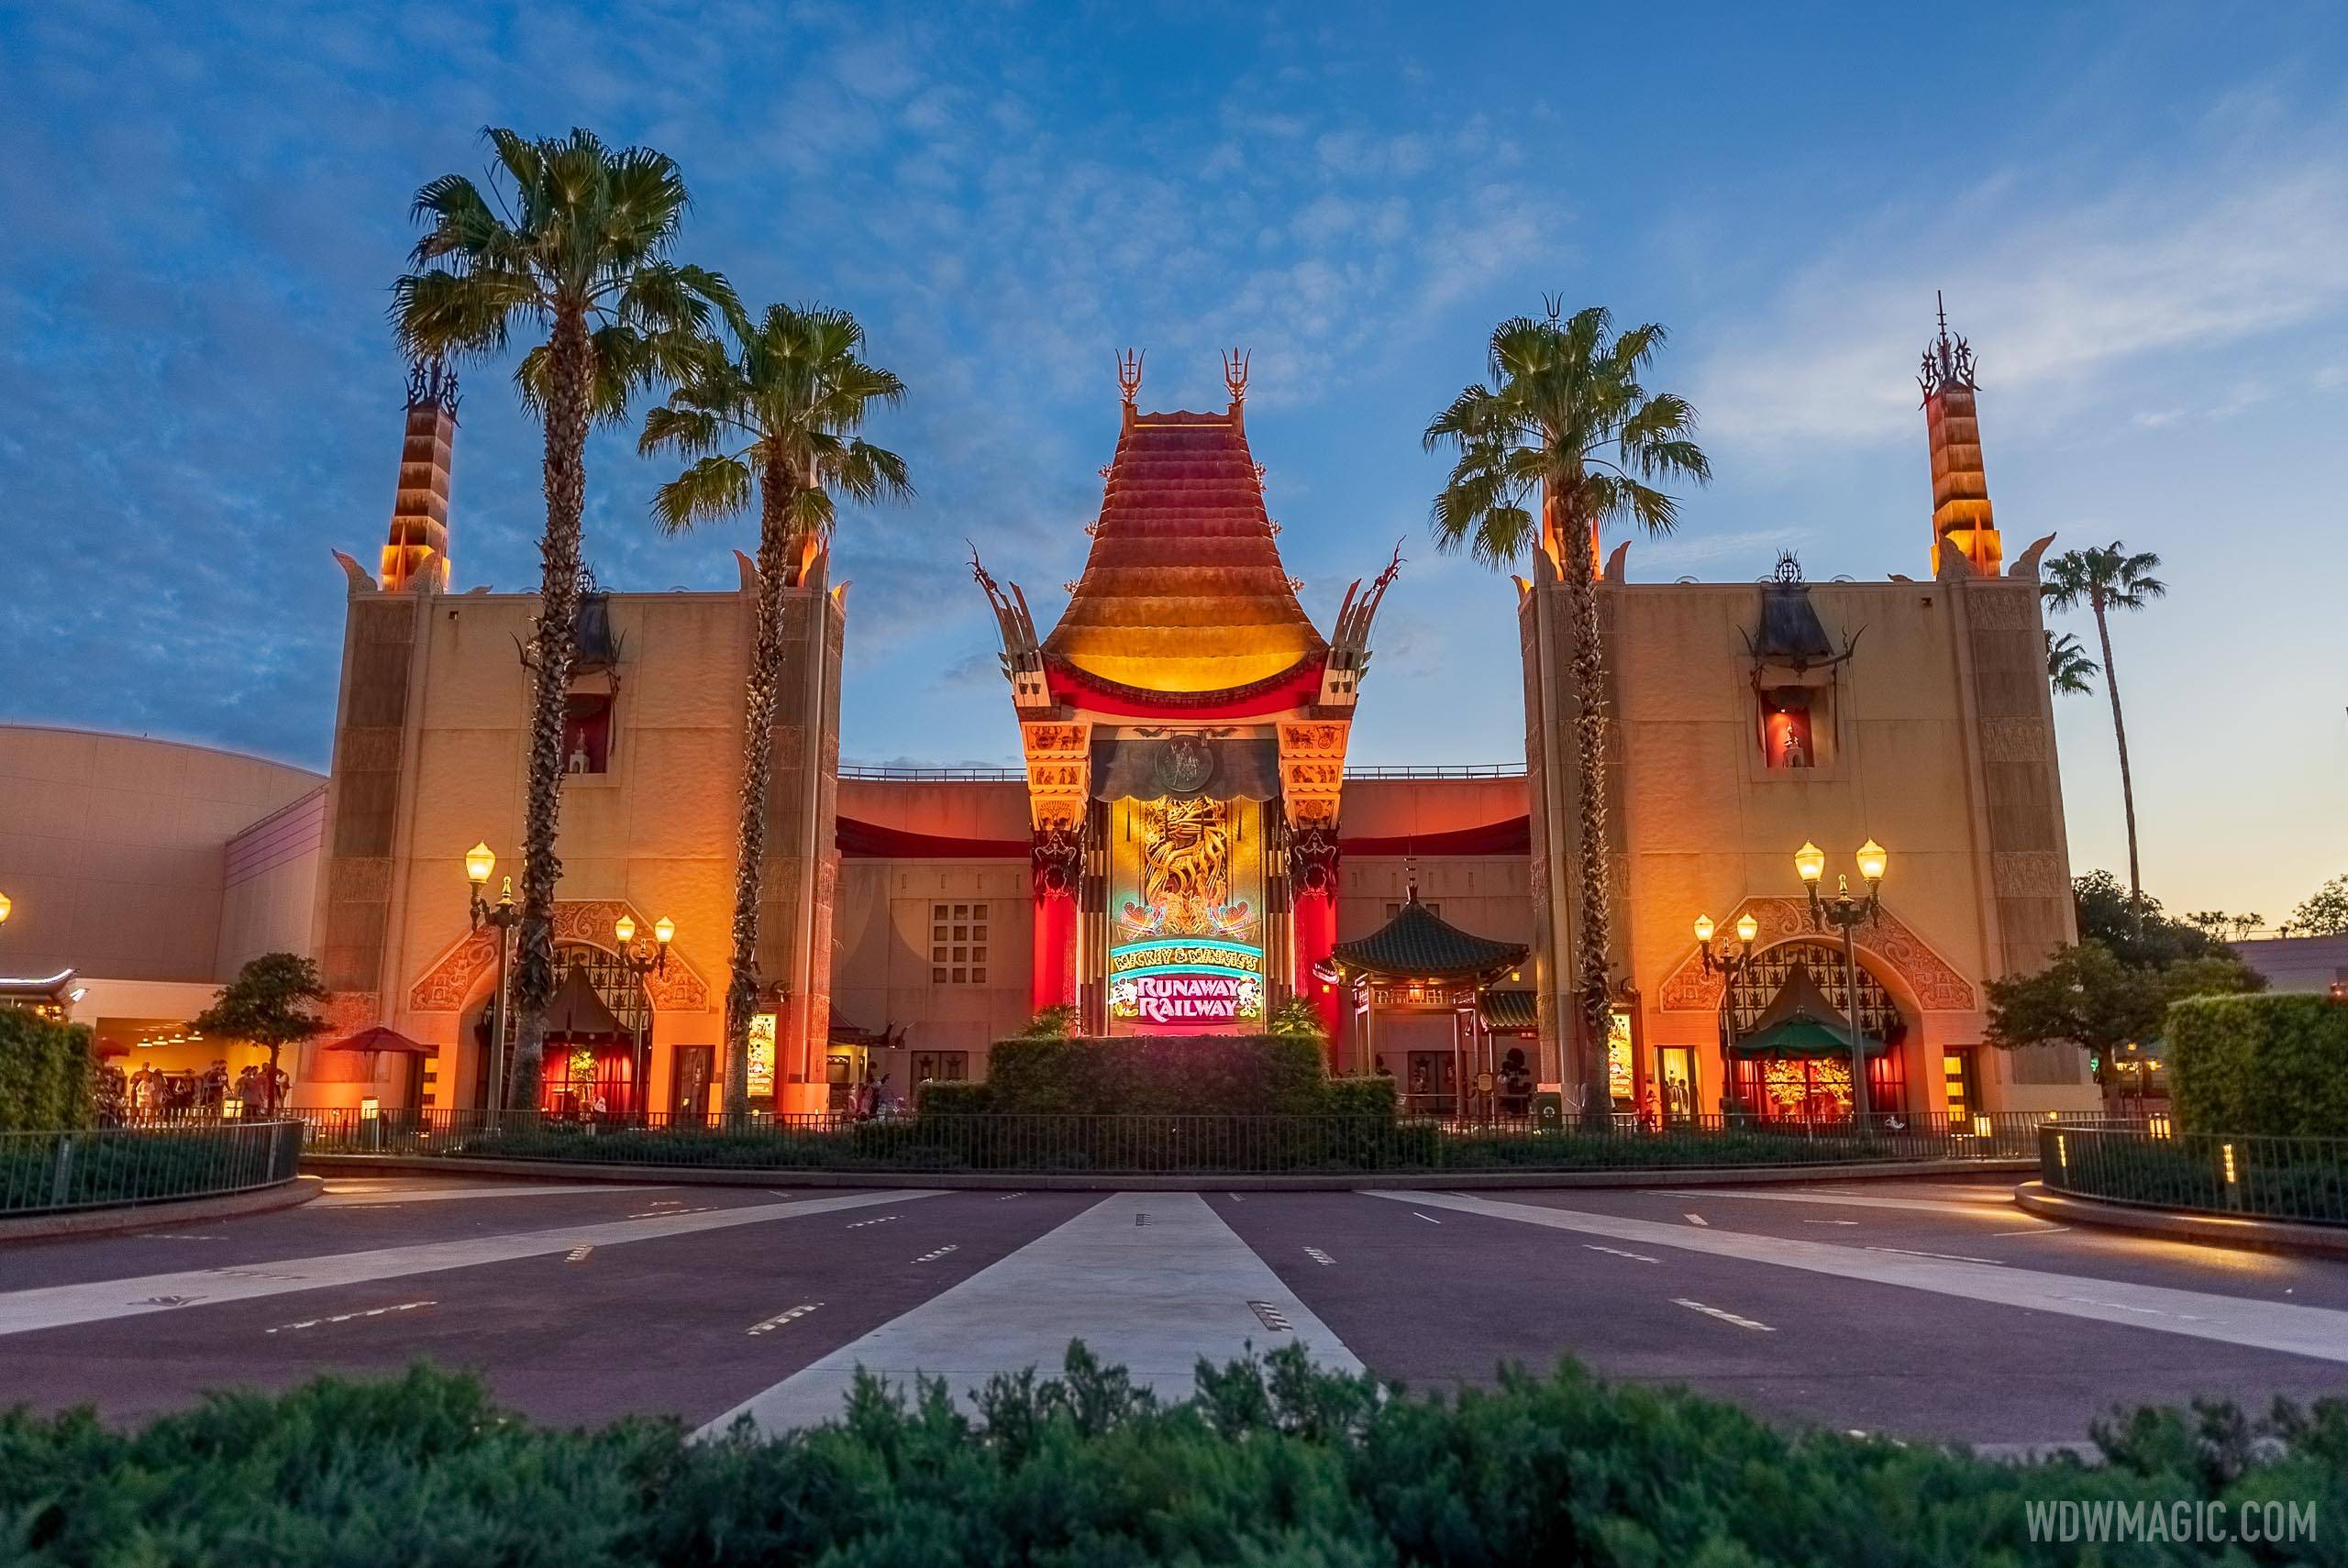 More closures confirmed for Disney's Hollywood Studios as the park moves ahead with redevelopment plans